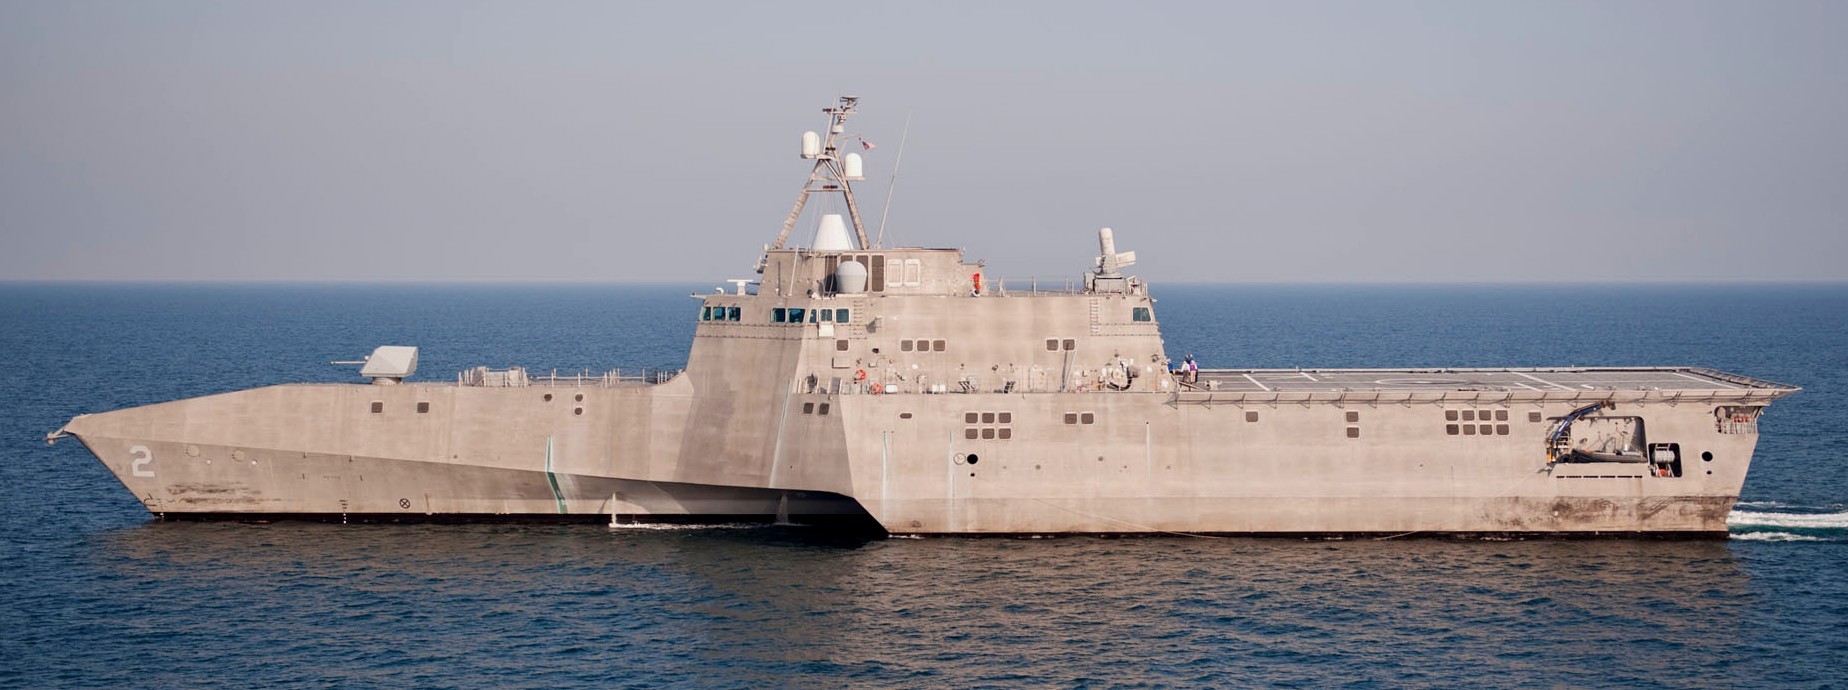 lcs-2 uss independence littoral combat ship us navy class 47a